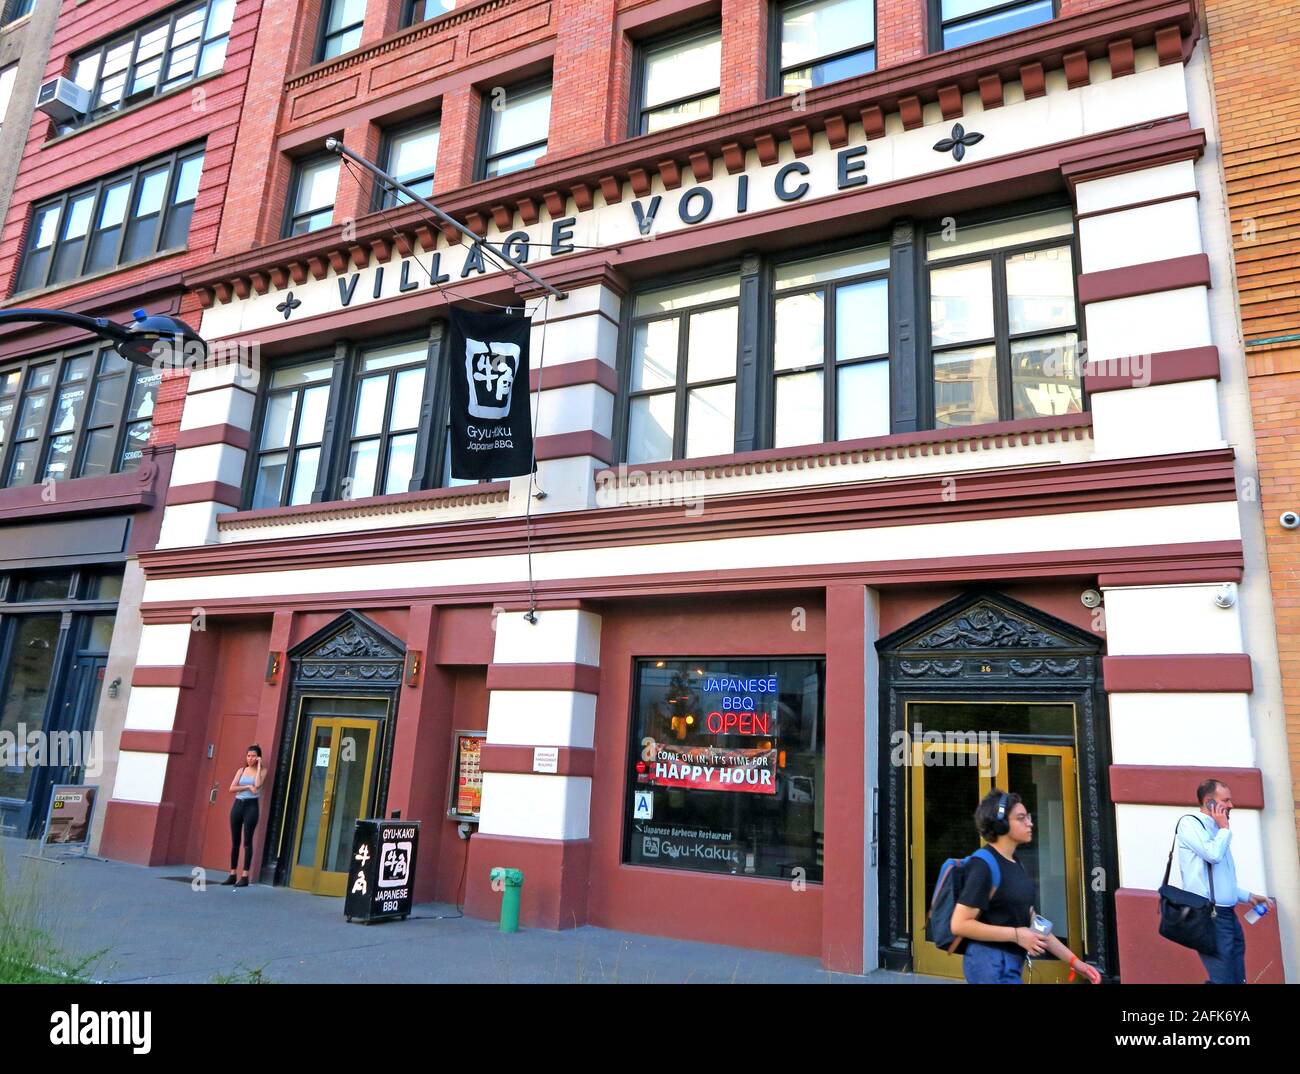 The iconic Village Voice newspaper building, 36 Cooper Square, New York, NY 10003, USA Stock Photo